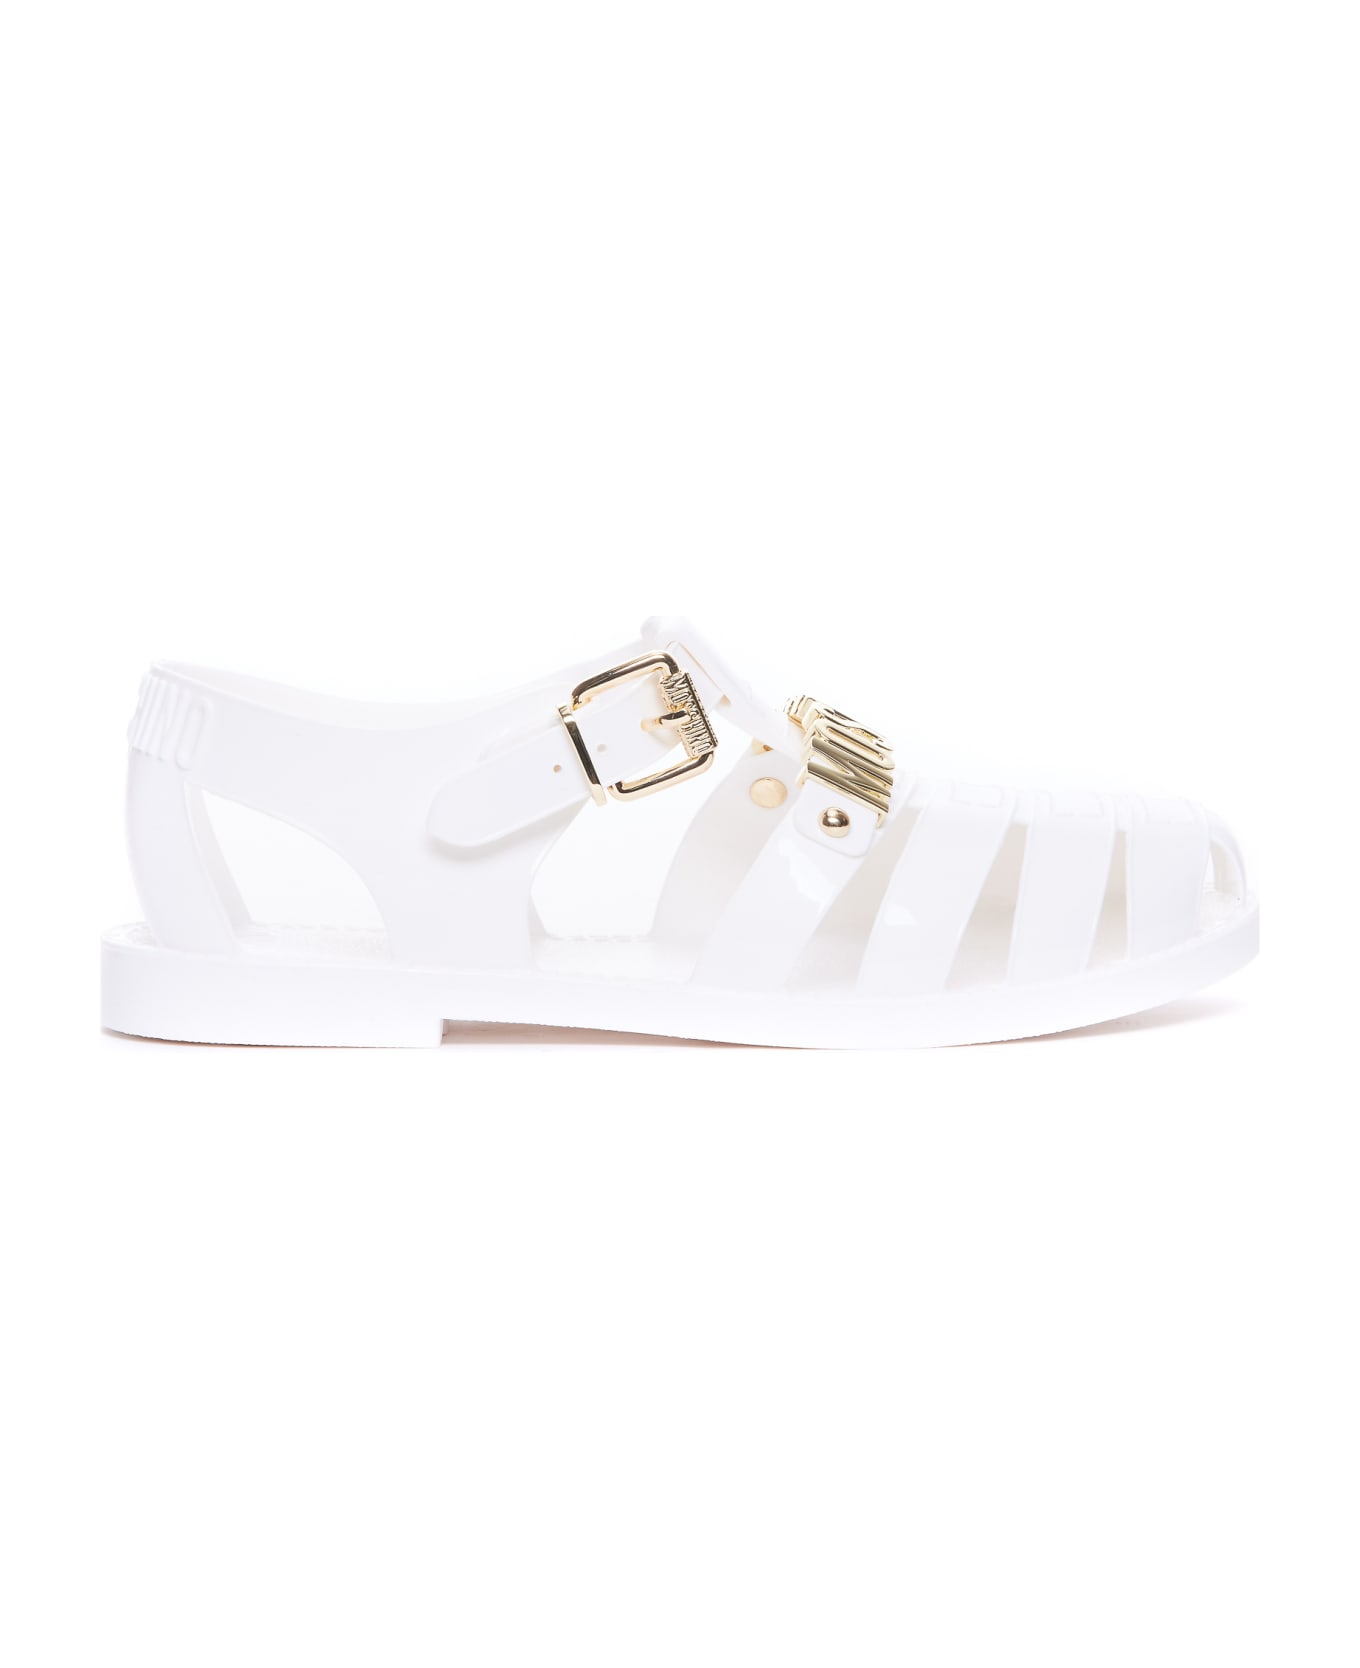 Moschino Jelly Sandals With Lettering Logo - White サンダル